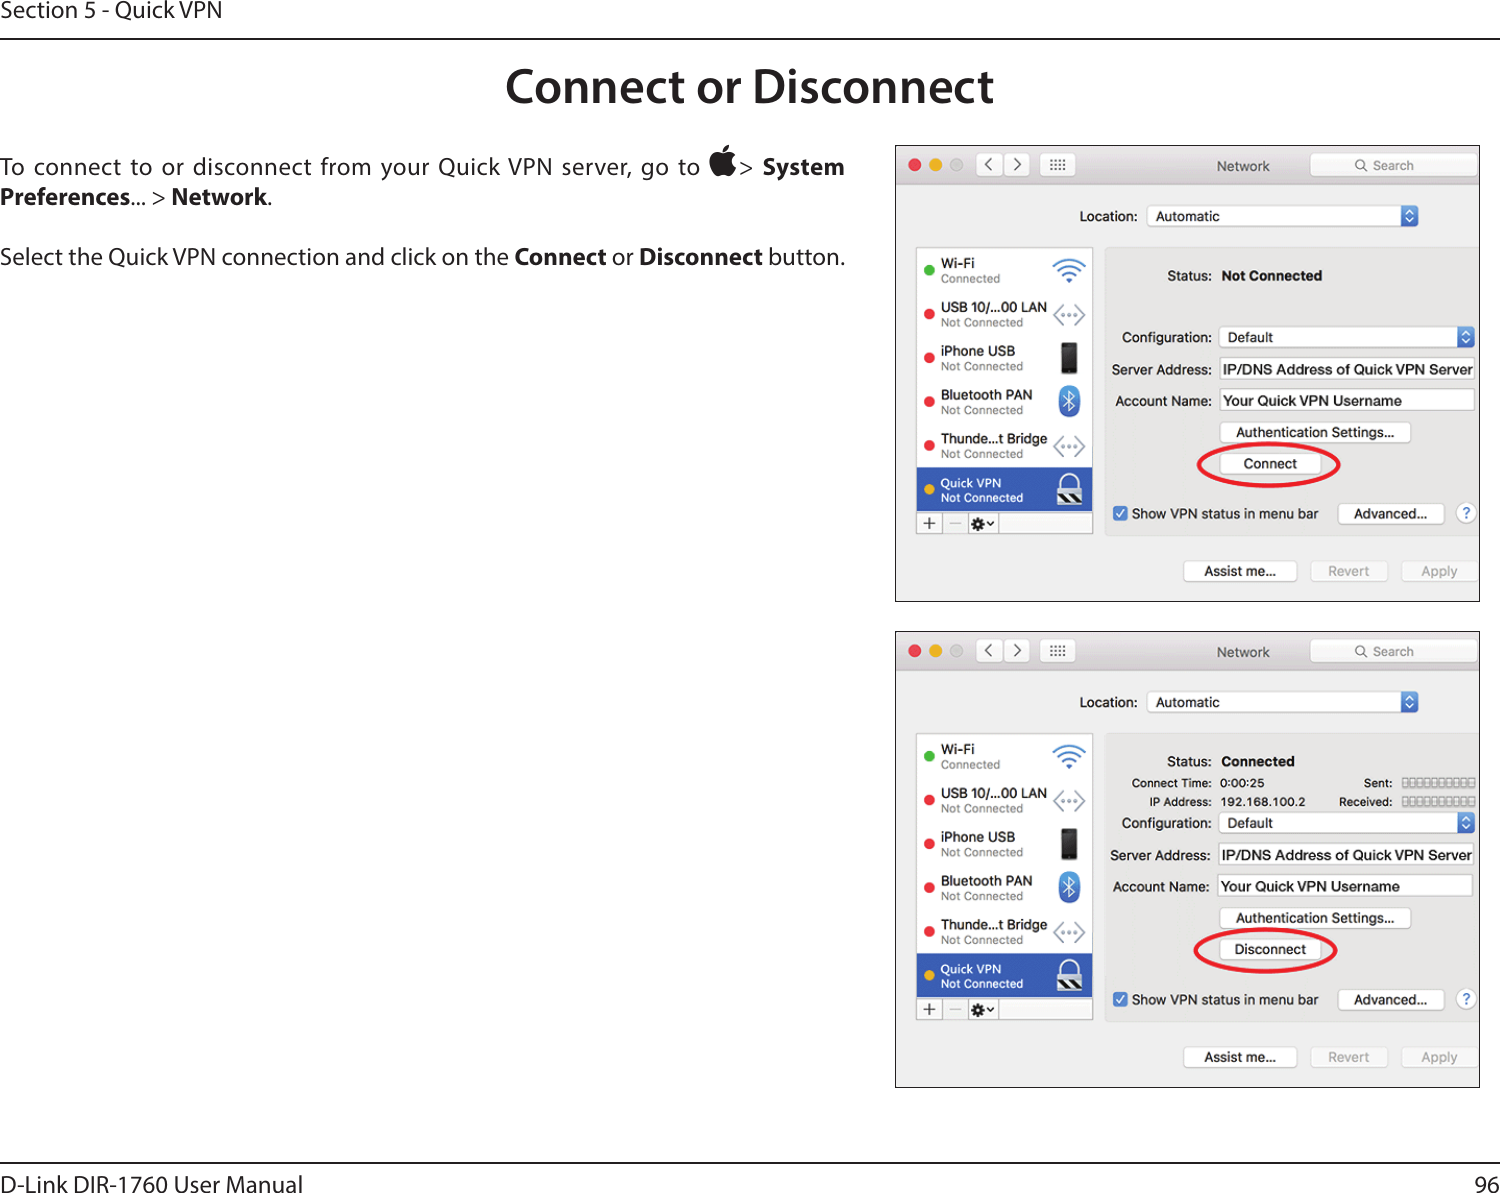 96D-Link DIR-1760 User ManualSection 5 - Quick VPNConnect or DisconnectTo connect to or disconnect from your Quick VPN server, go to &gt;  System Preferences... &gt; Network.Select the Quick VPN connection and click on the Connect or Disconnect button.